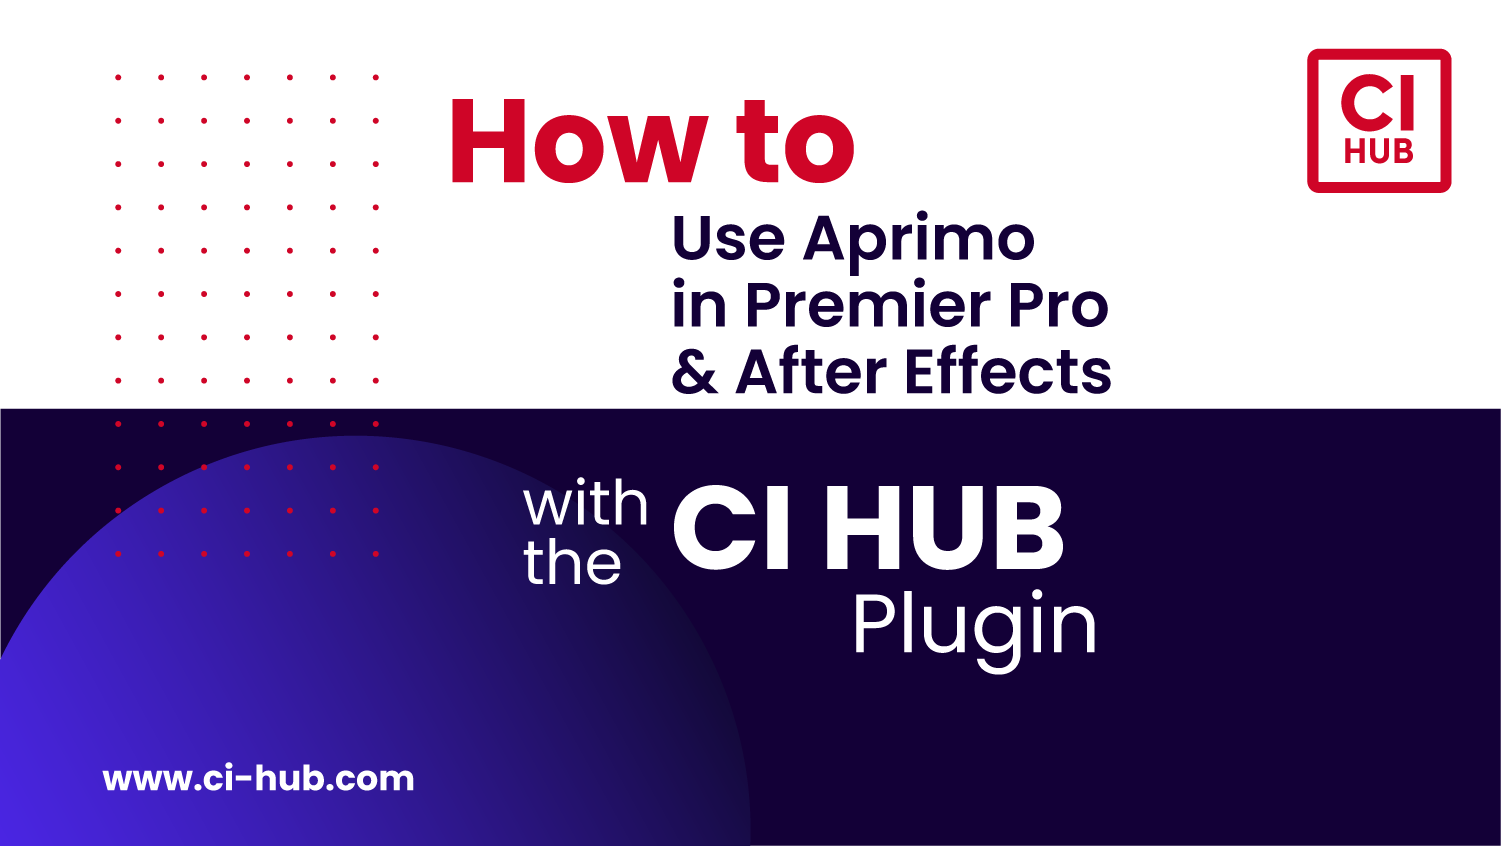 How to use Aprimo & CI HUB in Adobe Premiere Pro...